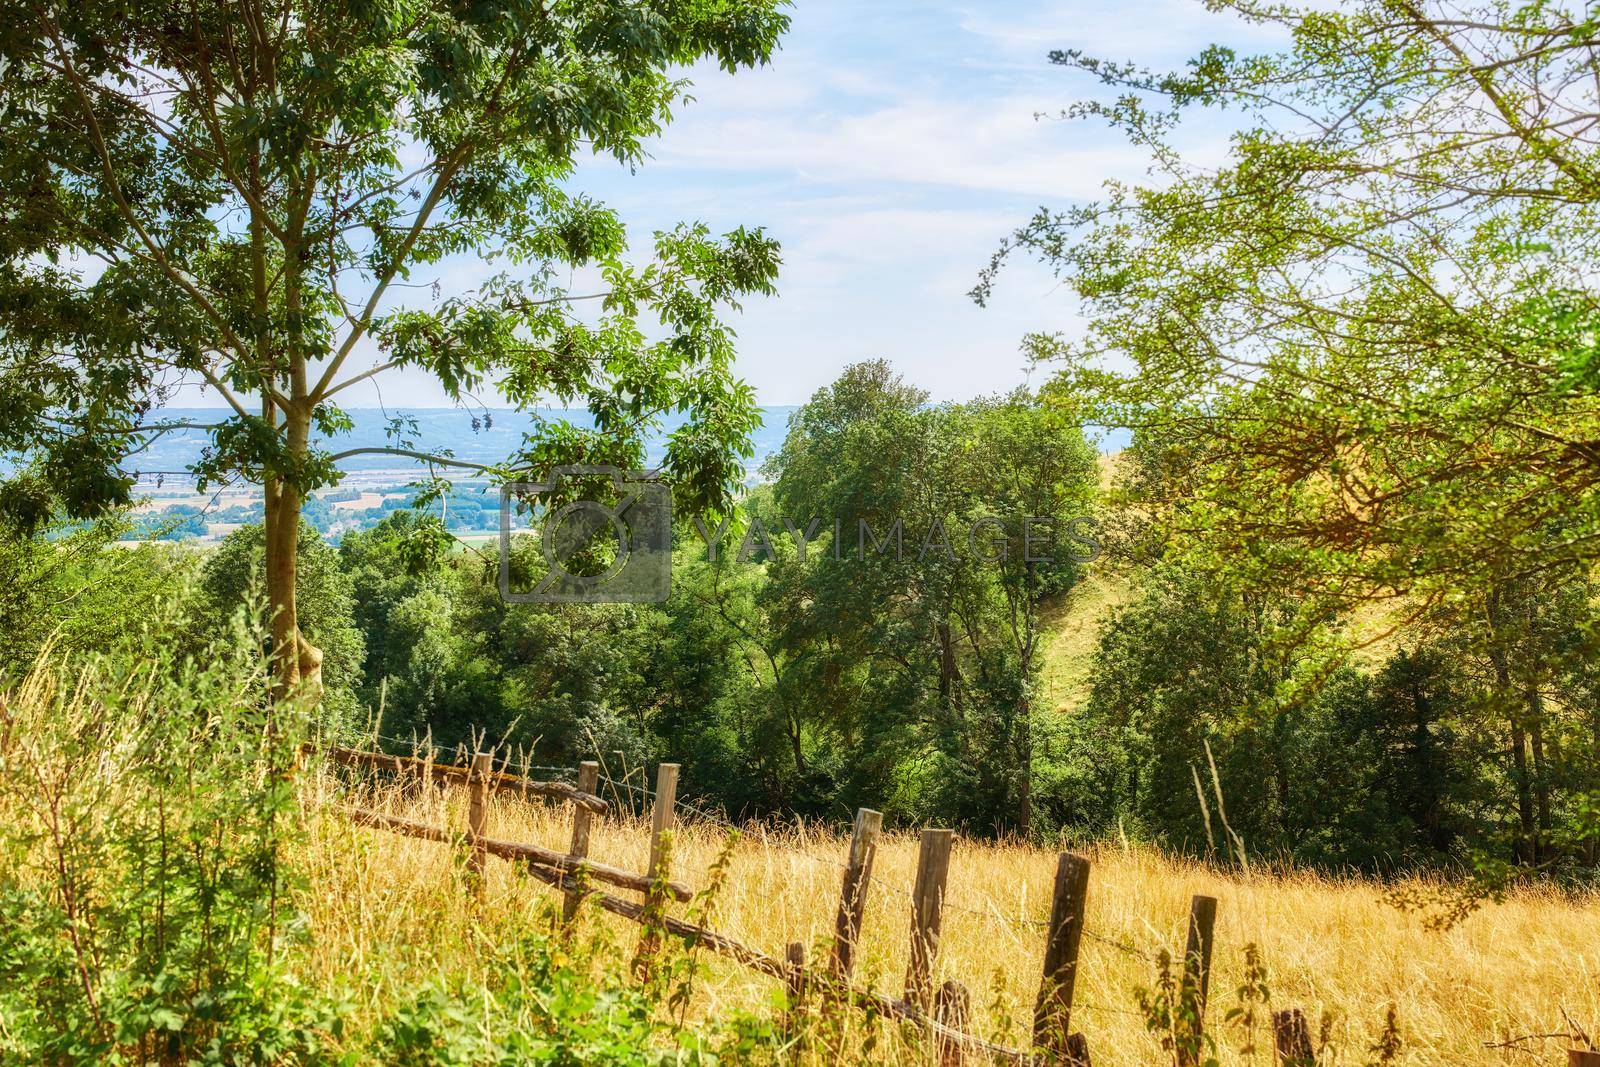 Nature filled with plants and trees in a forest or woods on a sunny day in Spring or Summer. View of beautiful farmland landscape in the countryside with a blue sky in the background